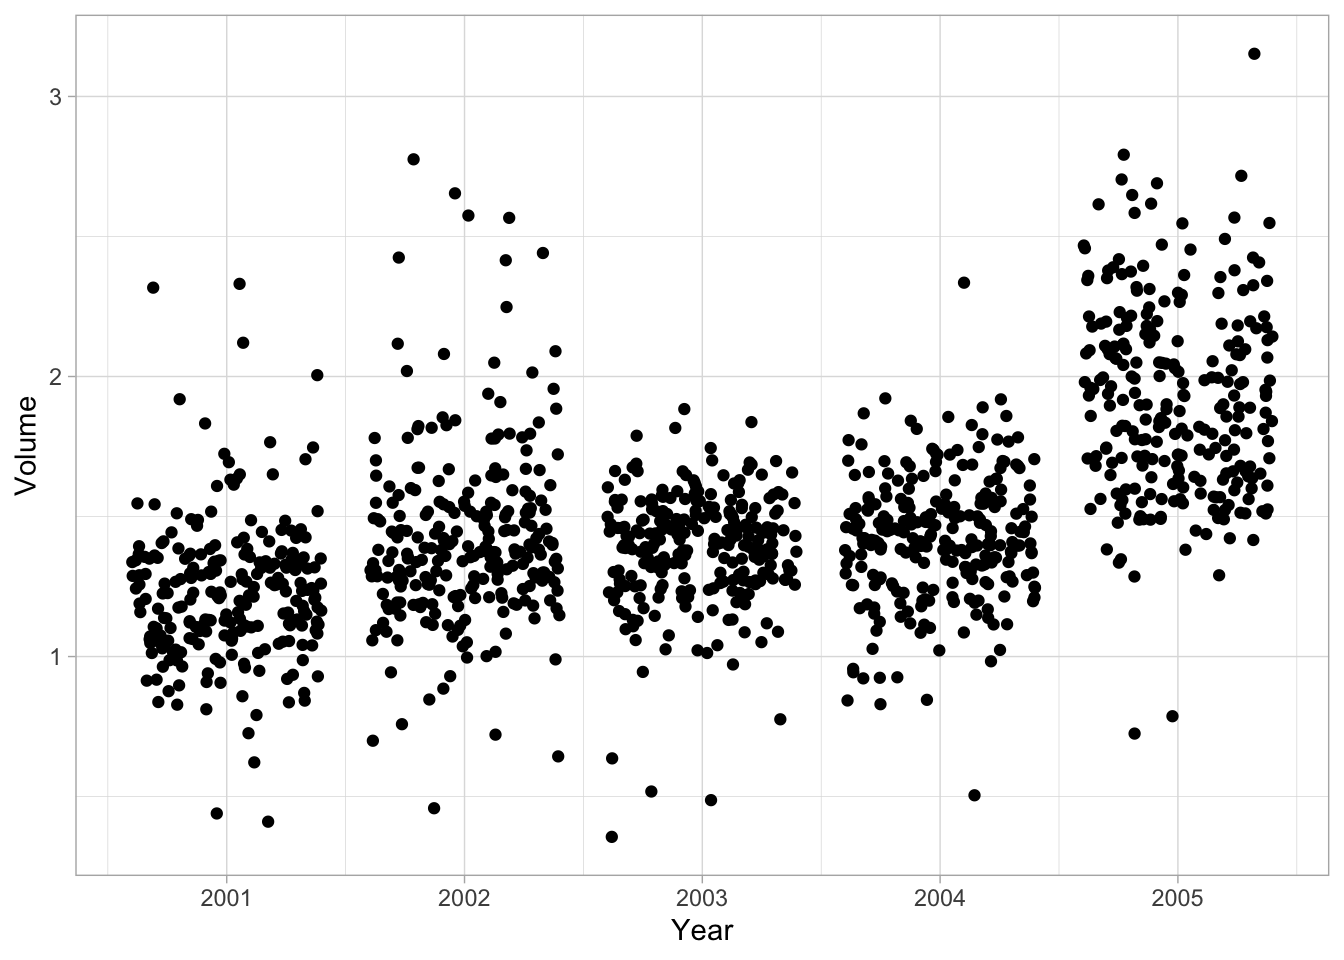 Jittered scatter chart. Jittered around year along the x-axis. Volume along the y-axis. Fairly wide scattering along volume. Slight increase in volumne as year increase.